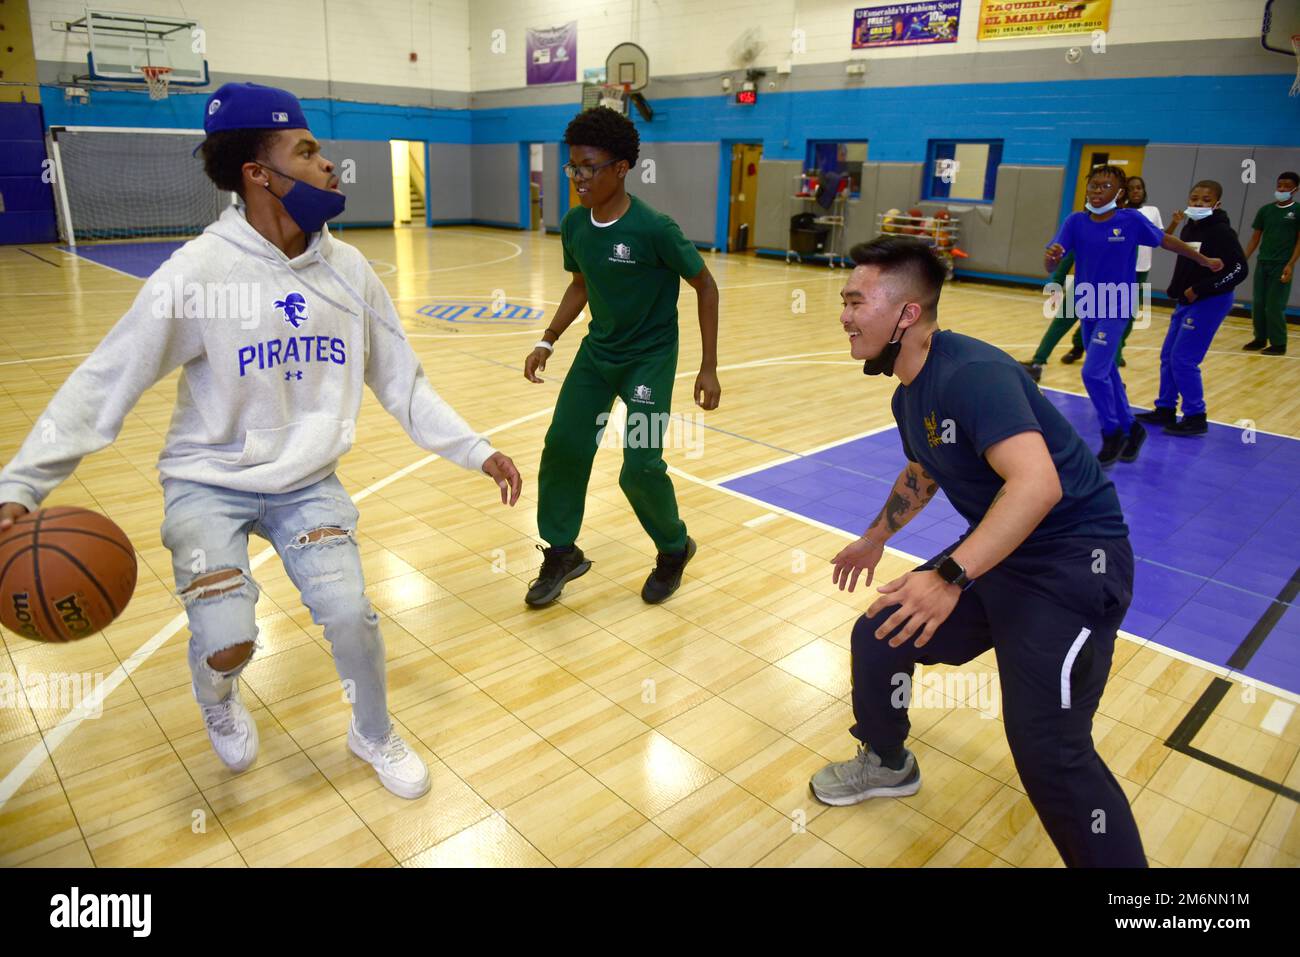 TRENTON, N.J. -- (MAY 3, 2022) U.S. Navy Religious Program Specialist Michael Declaro from San Leandro, Calif, attached to USS Princeton (CG-59) right, plays basketball with kids from the Boys and Girls Club. Declaro led a team of kids as team captain. Declaro's team won the pick-up game, 58-50. Everyone had fun and met new people.   The Navy has done over 20 humanitarian aid and community outreach projects in the greater Trenton, NJ area this week as part of Navy Week Trenton. Navy Week events are held in different cities across the United States year round. They are designed to connect Ameri Stock Photo